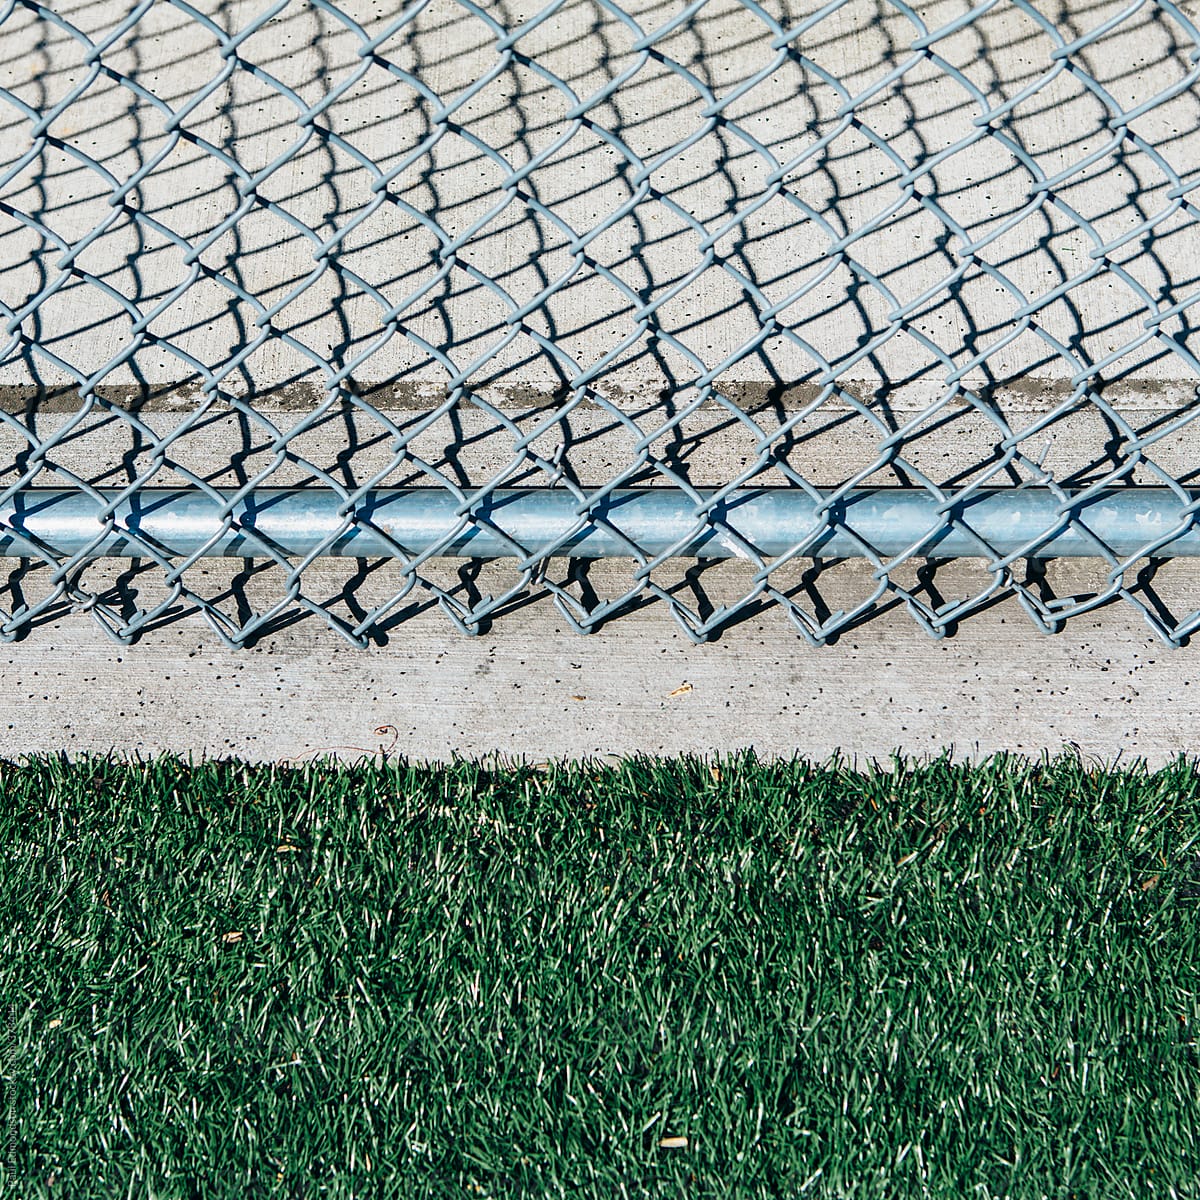 Chain link fence on edge of artificial turf sports field, close up